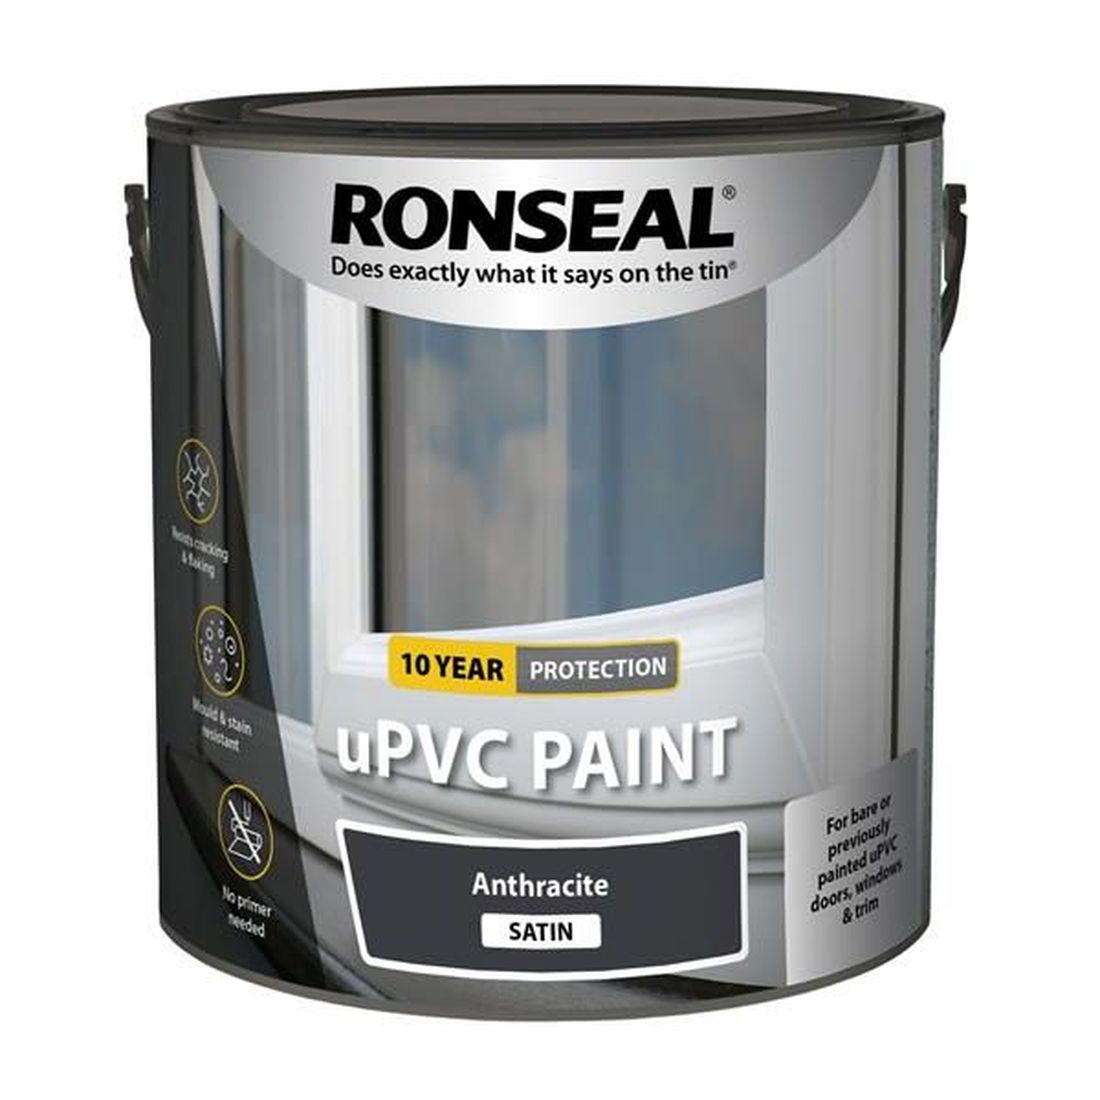 Ronseal uPVC Paint Anthracite Satin 2.5 litre                                           